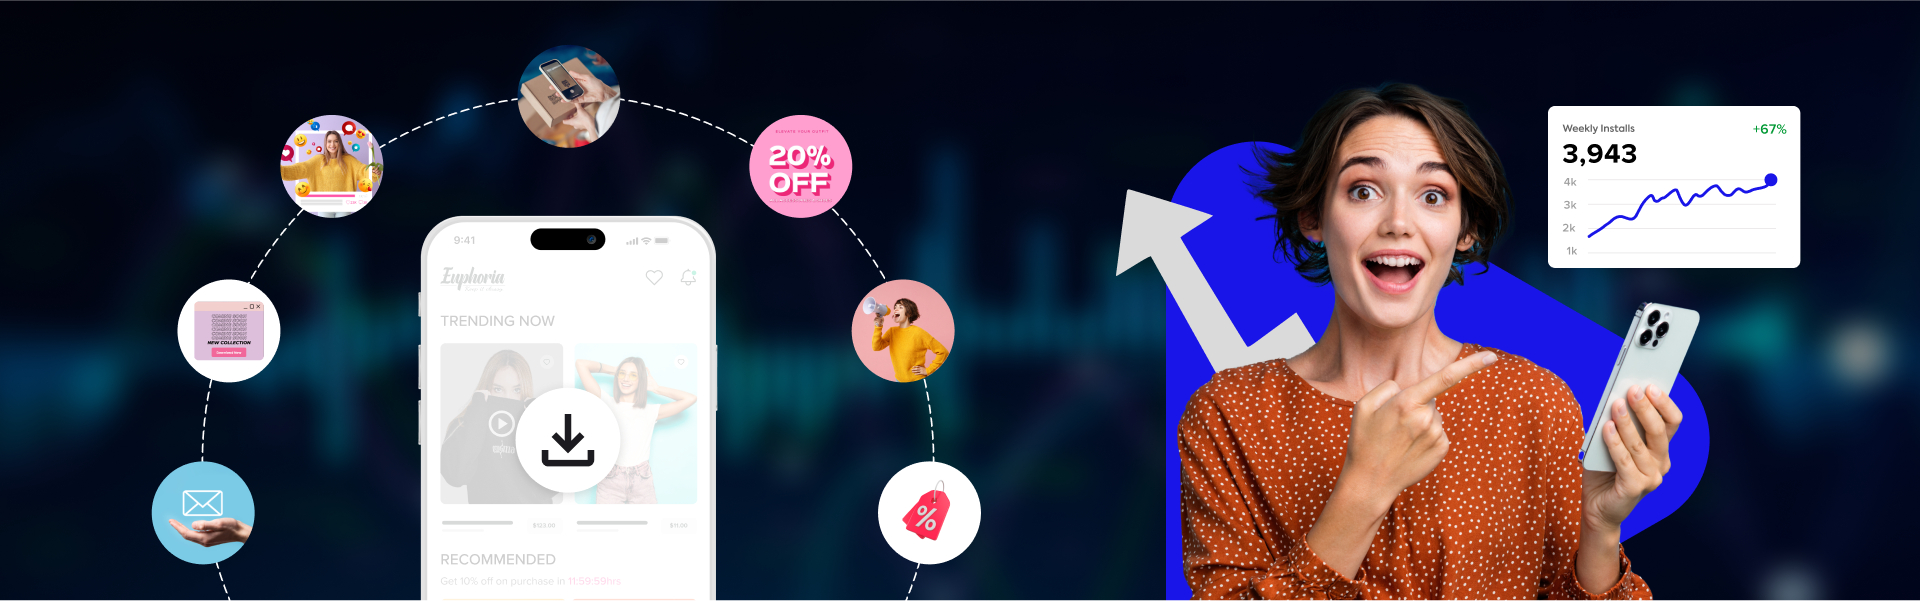 A woman excitedly points to app install growth stats on her phone with marketing icons and discount offers on an abstract background.